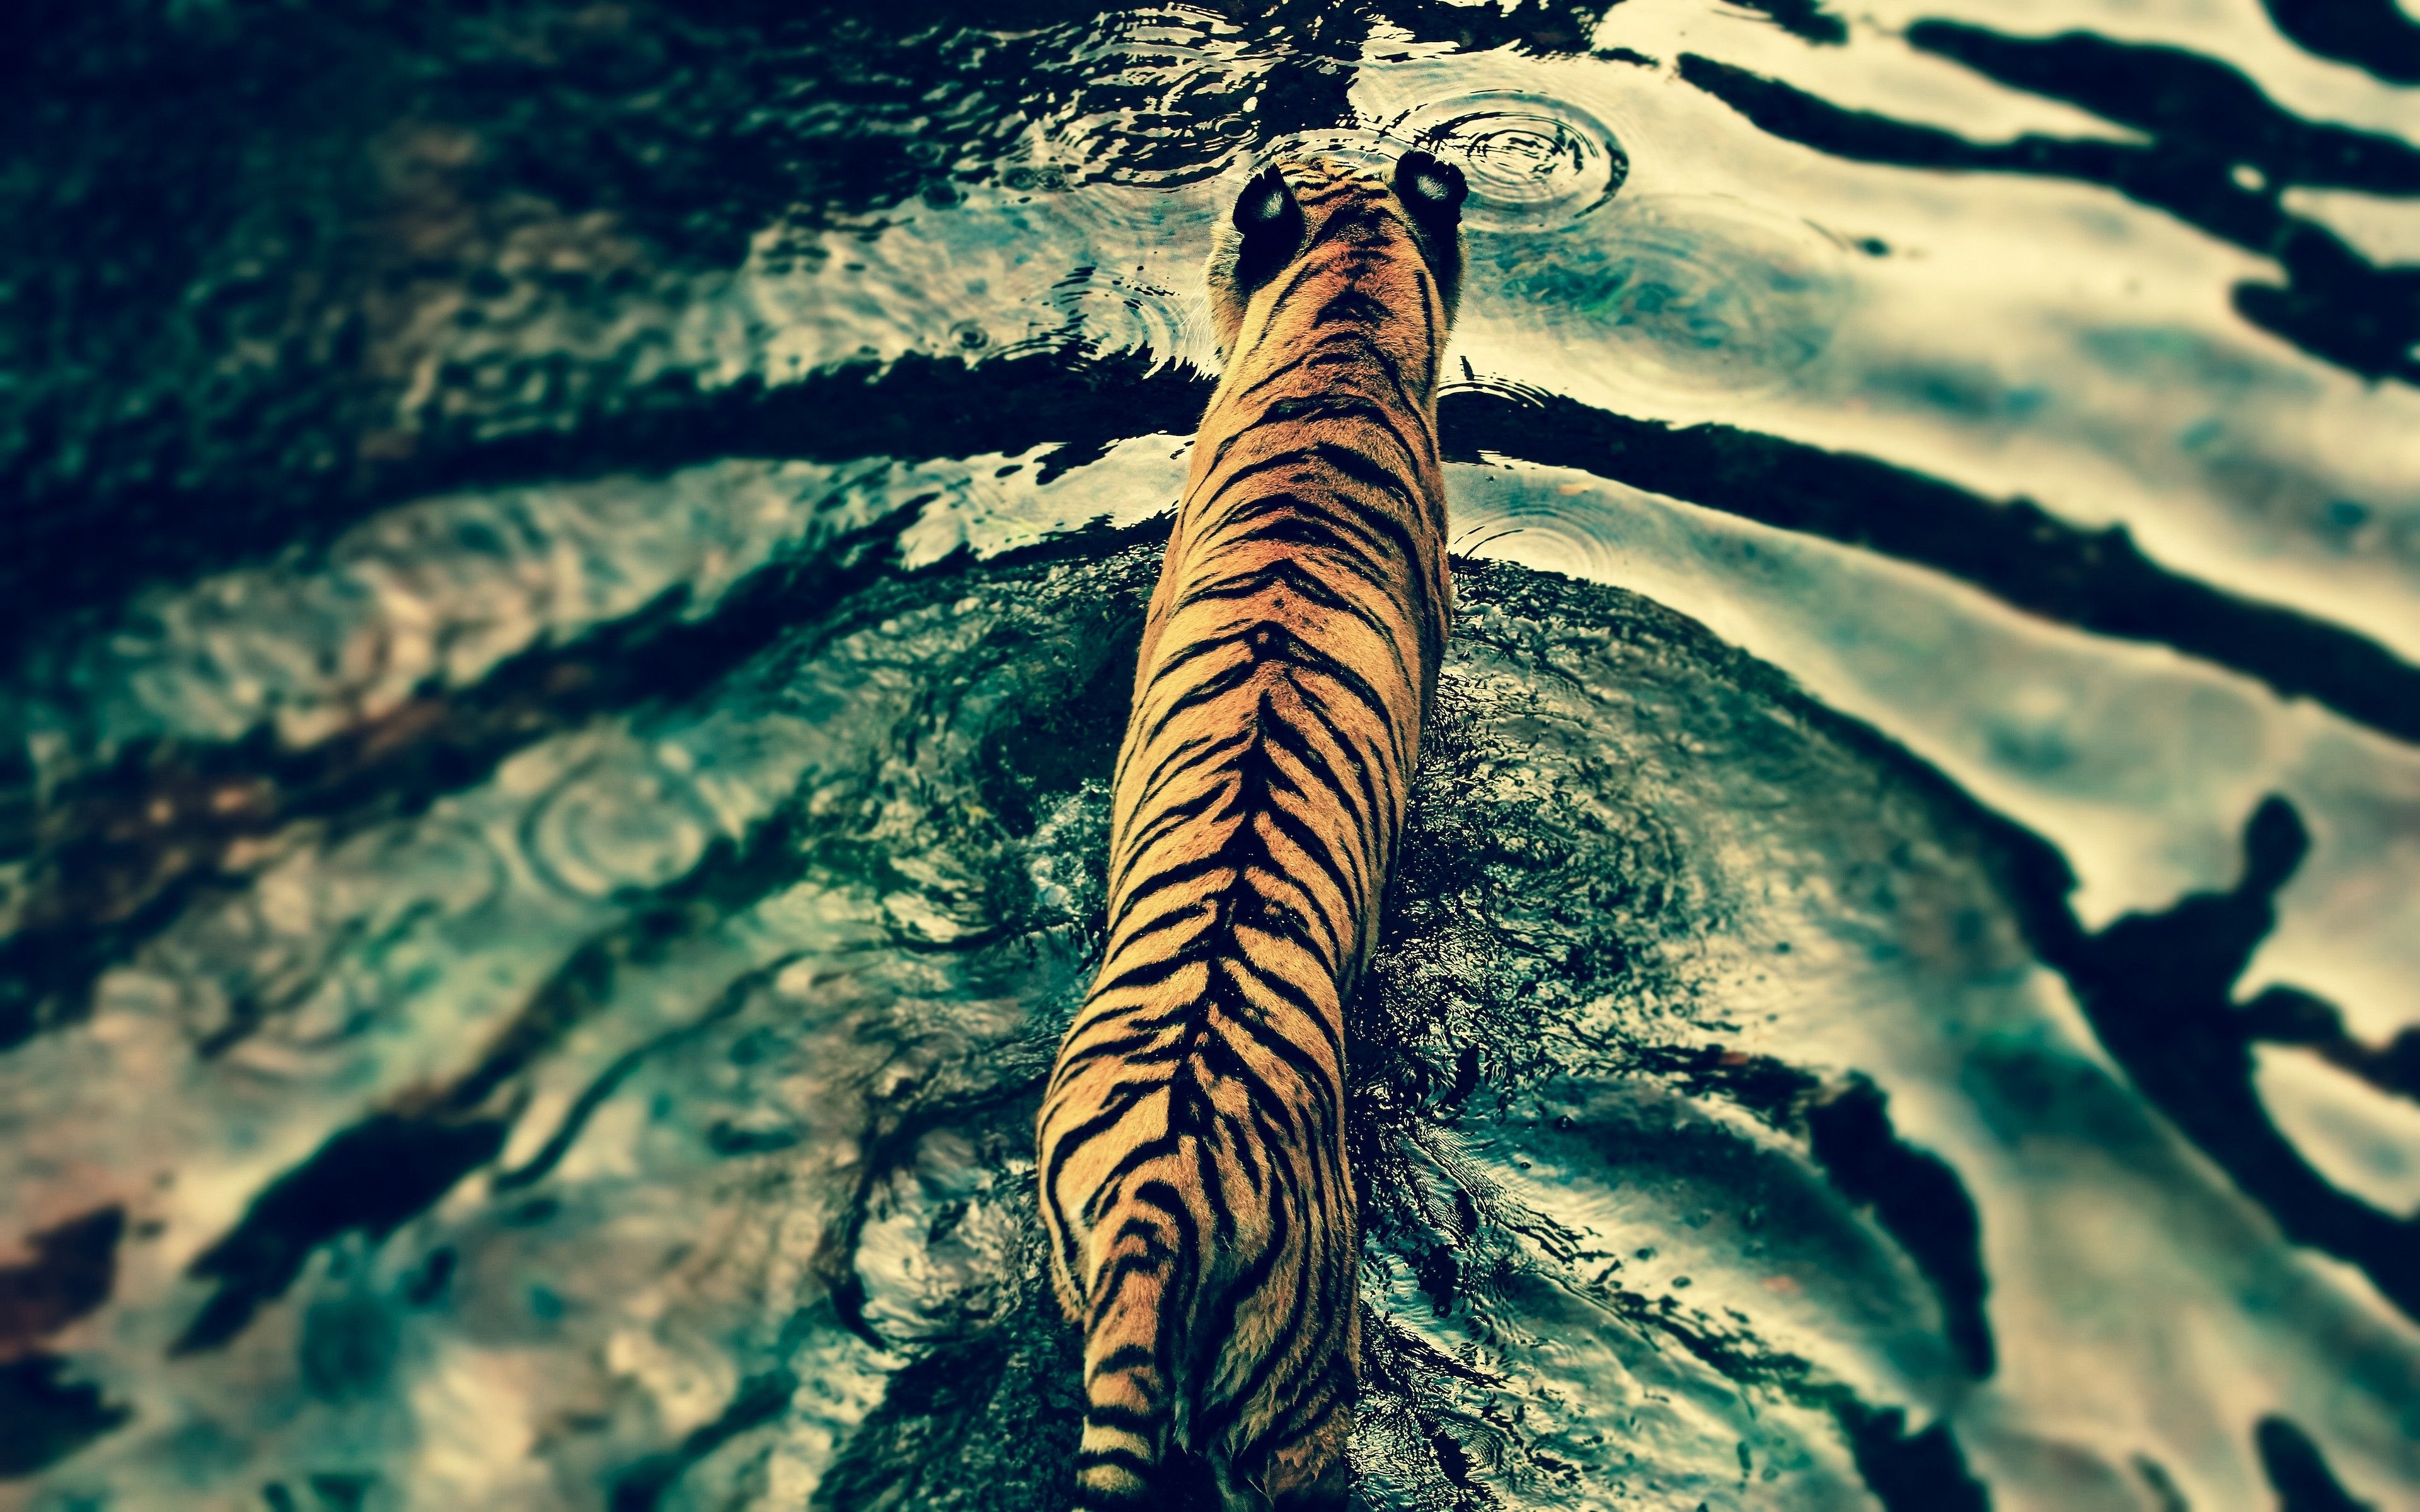 A tiger is walking through the water - Water, tiger